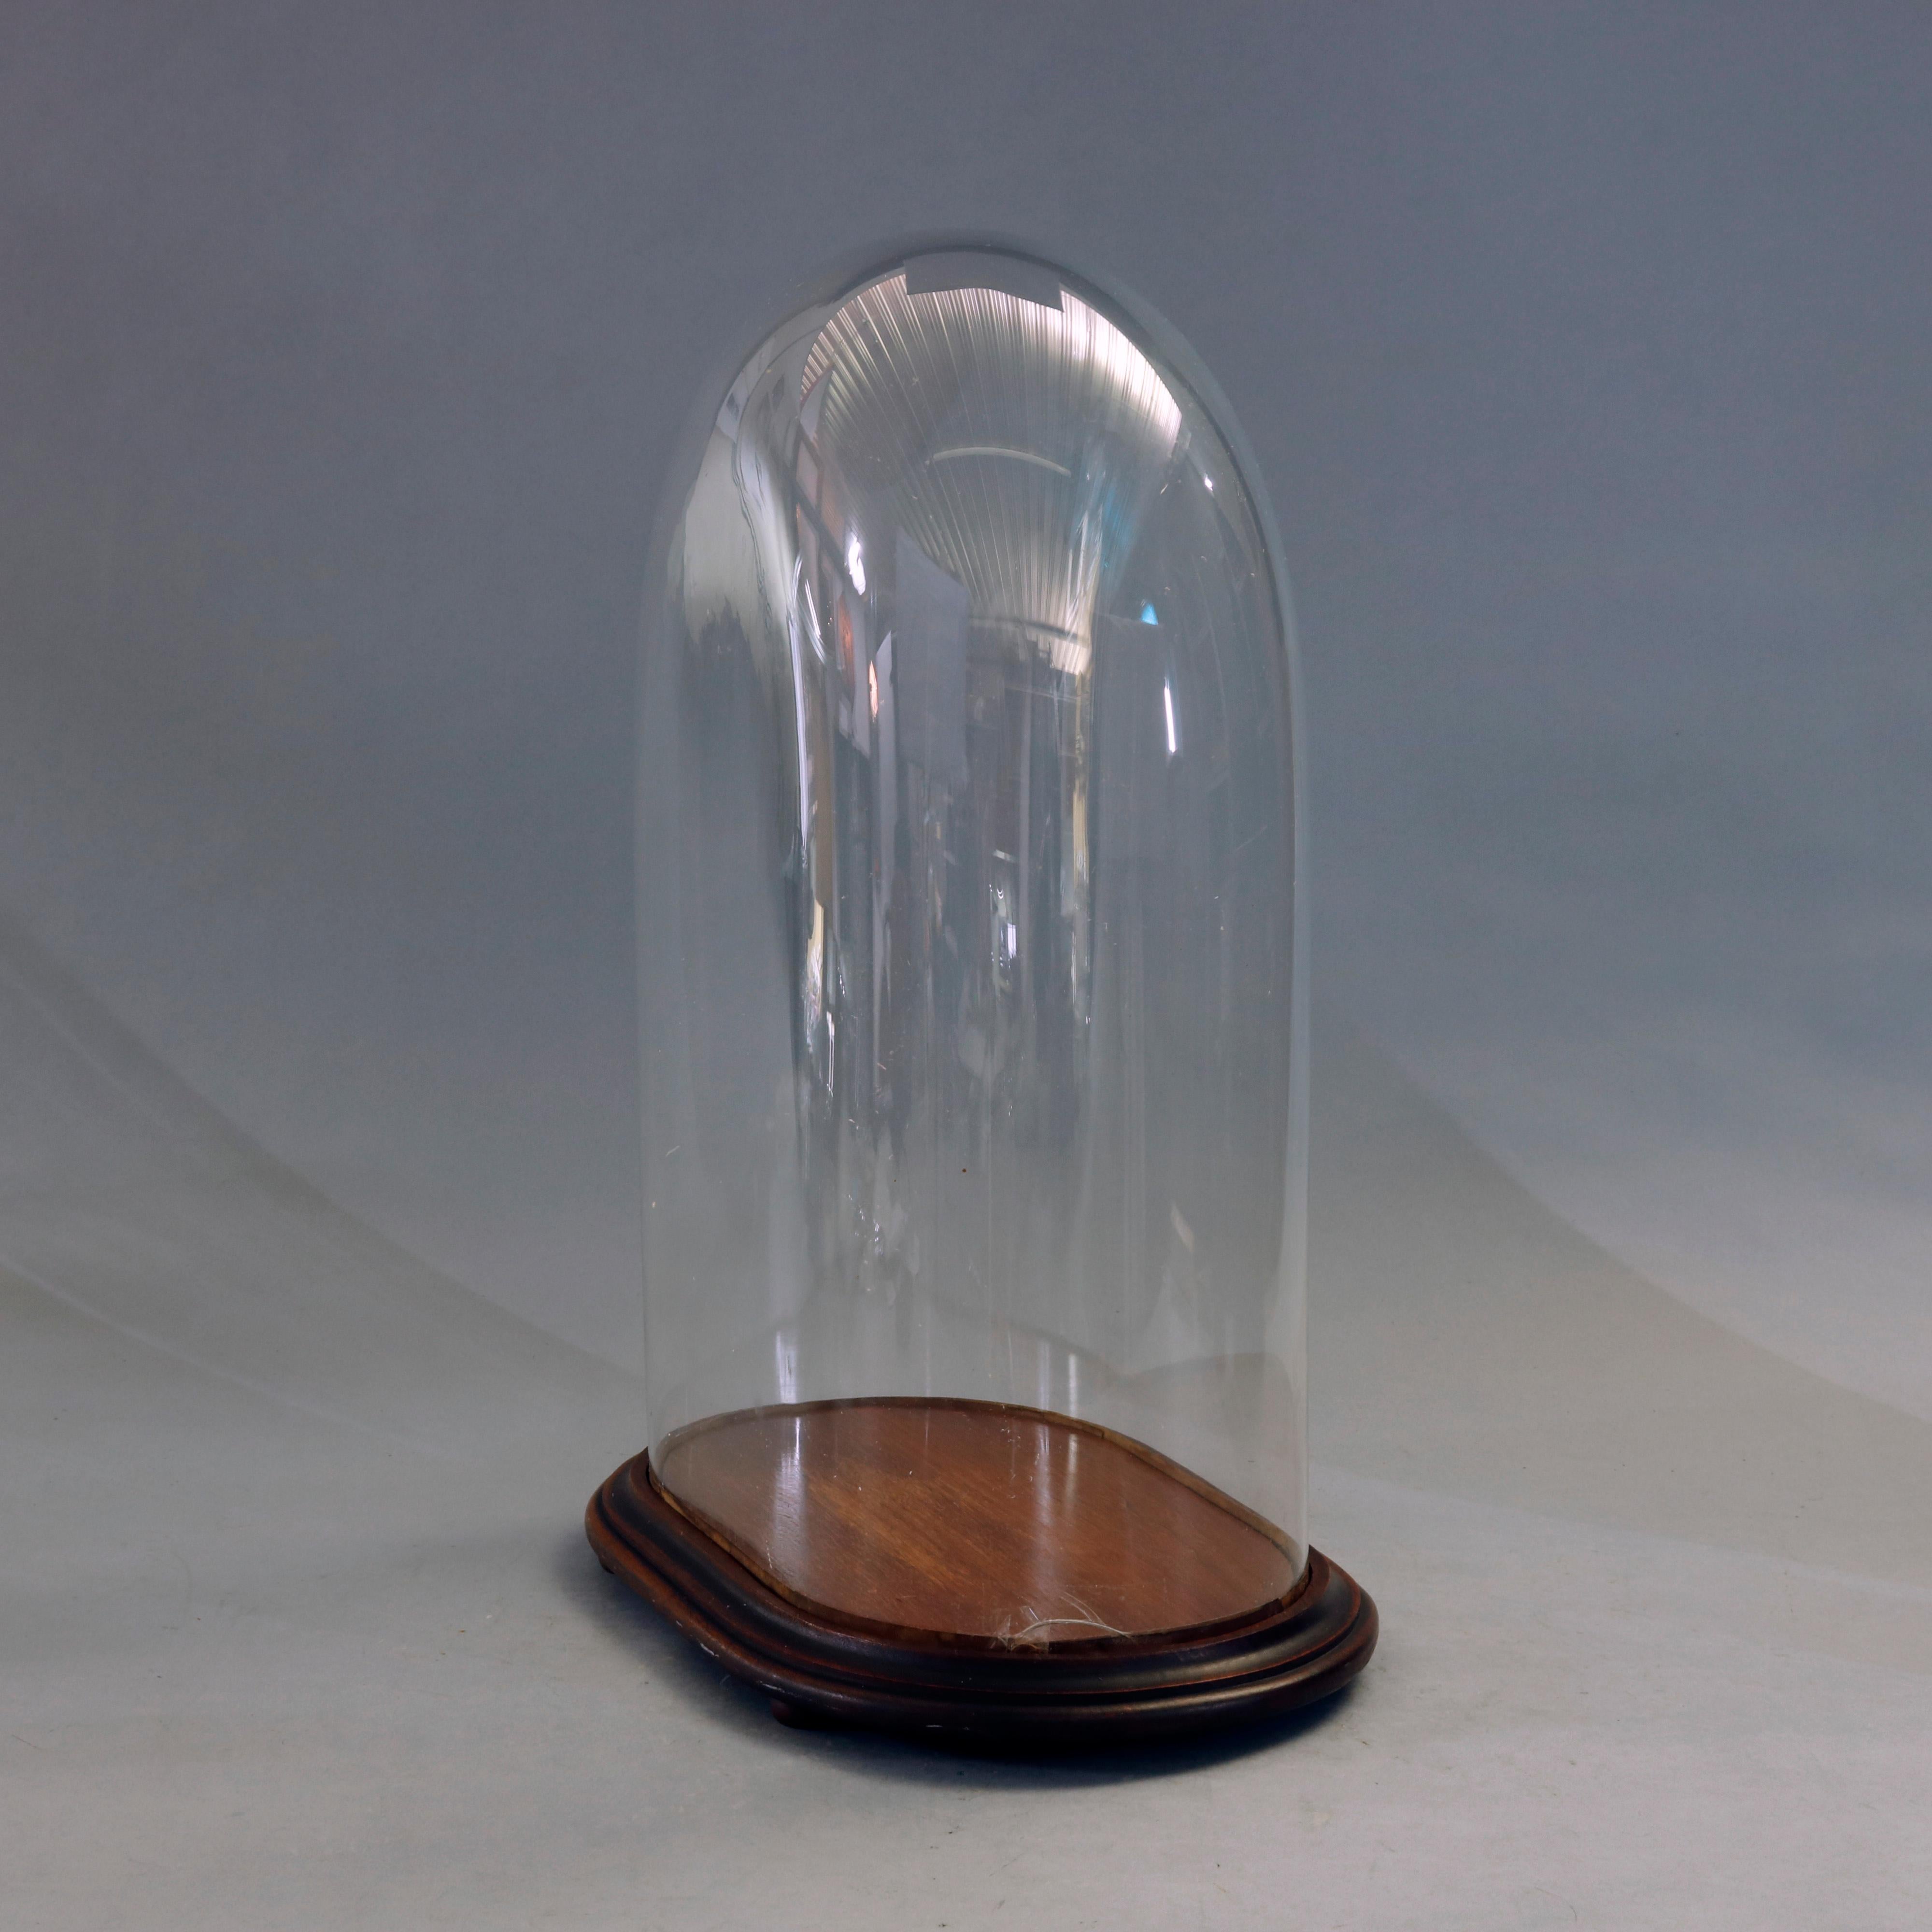 An antique glass clock display dome with mahogany base, circa 1890
no label
Measures: 21.5